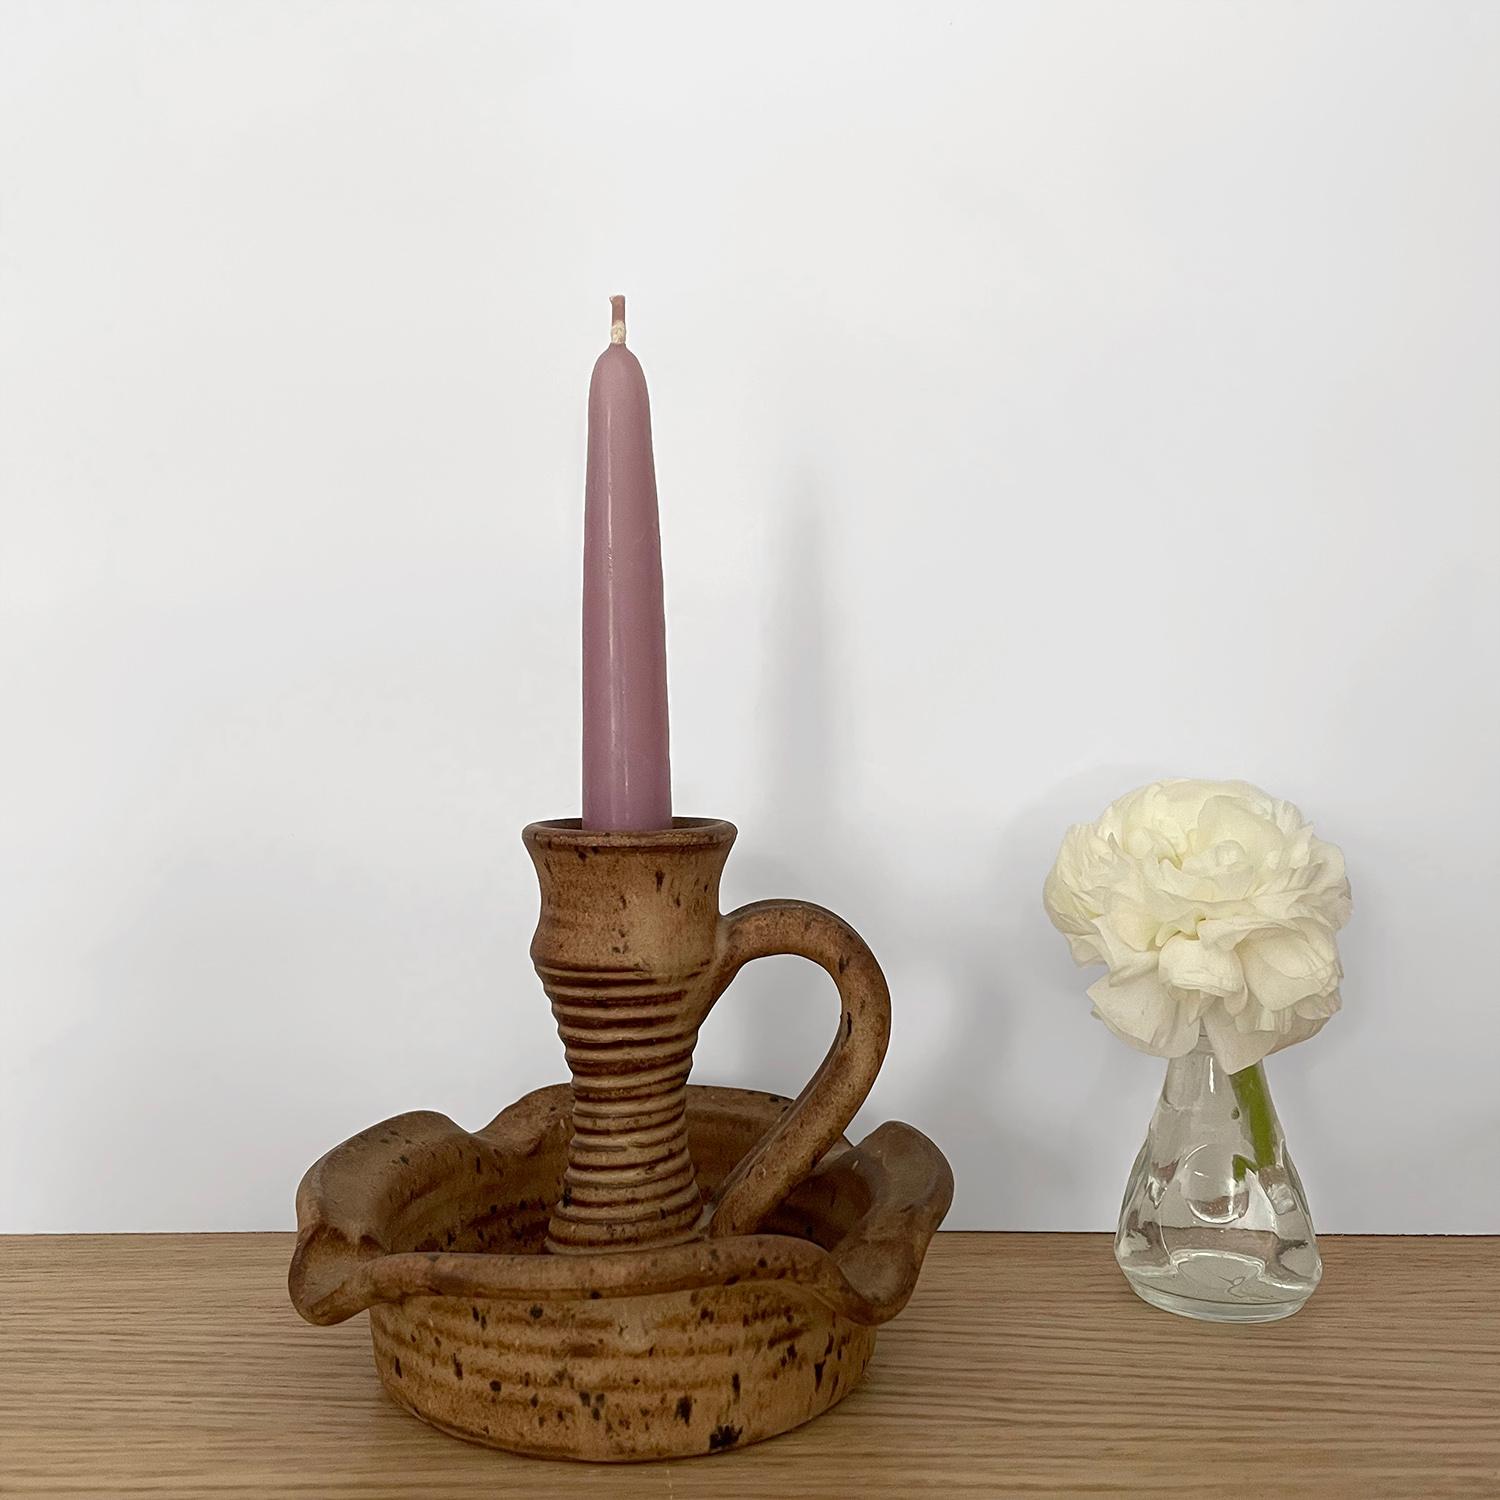 French ceramic earthenware candle holder
Vallauris France 
Organic composition and feel 
Neutral toned ceramic piece
Natural color variations throughout
Holds a single candle, not included 
Patina from age and use
Last photo is for reference